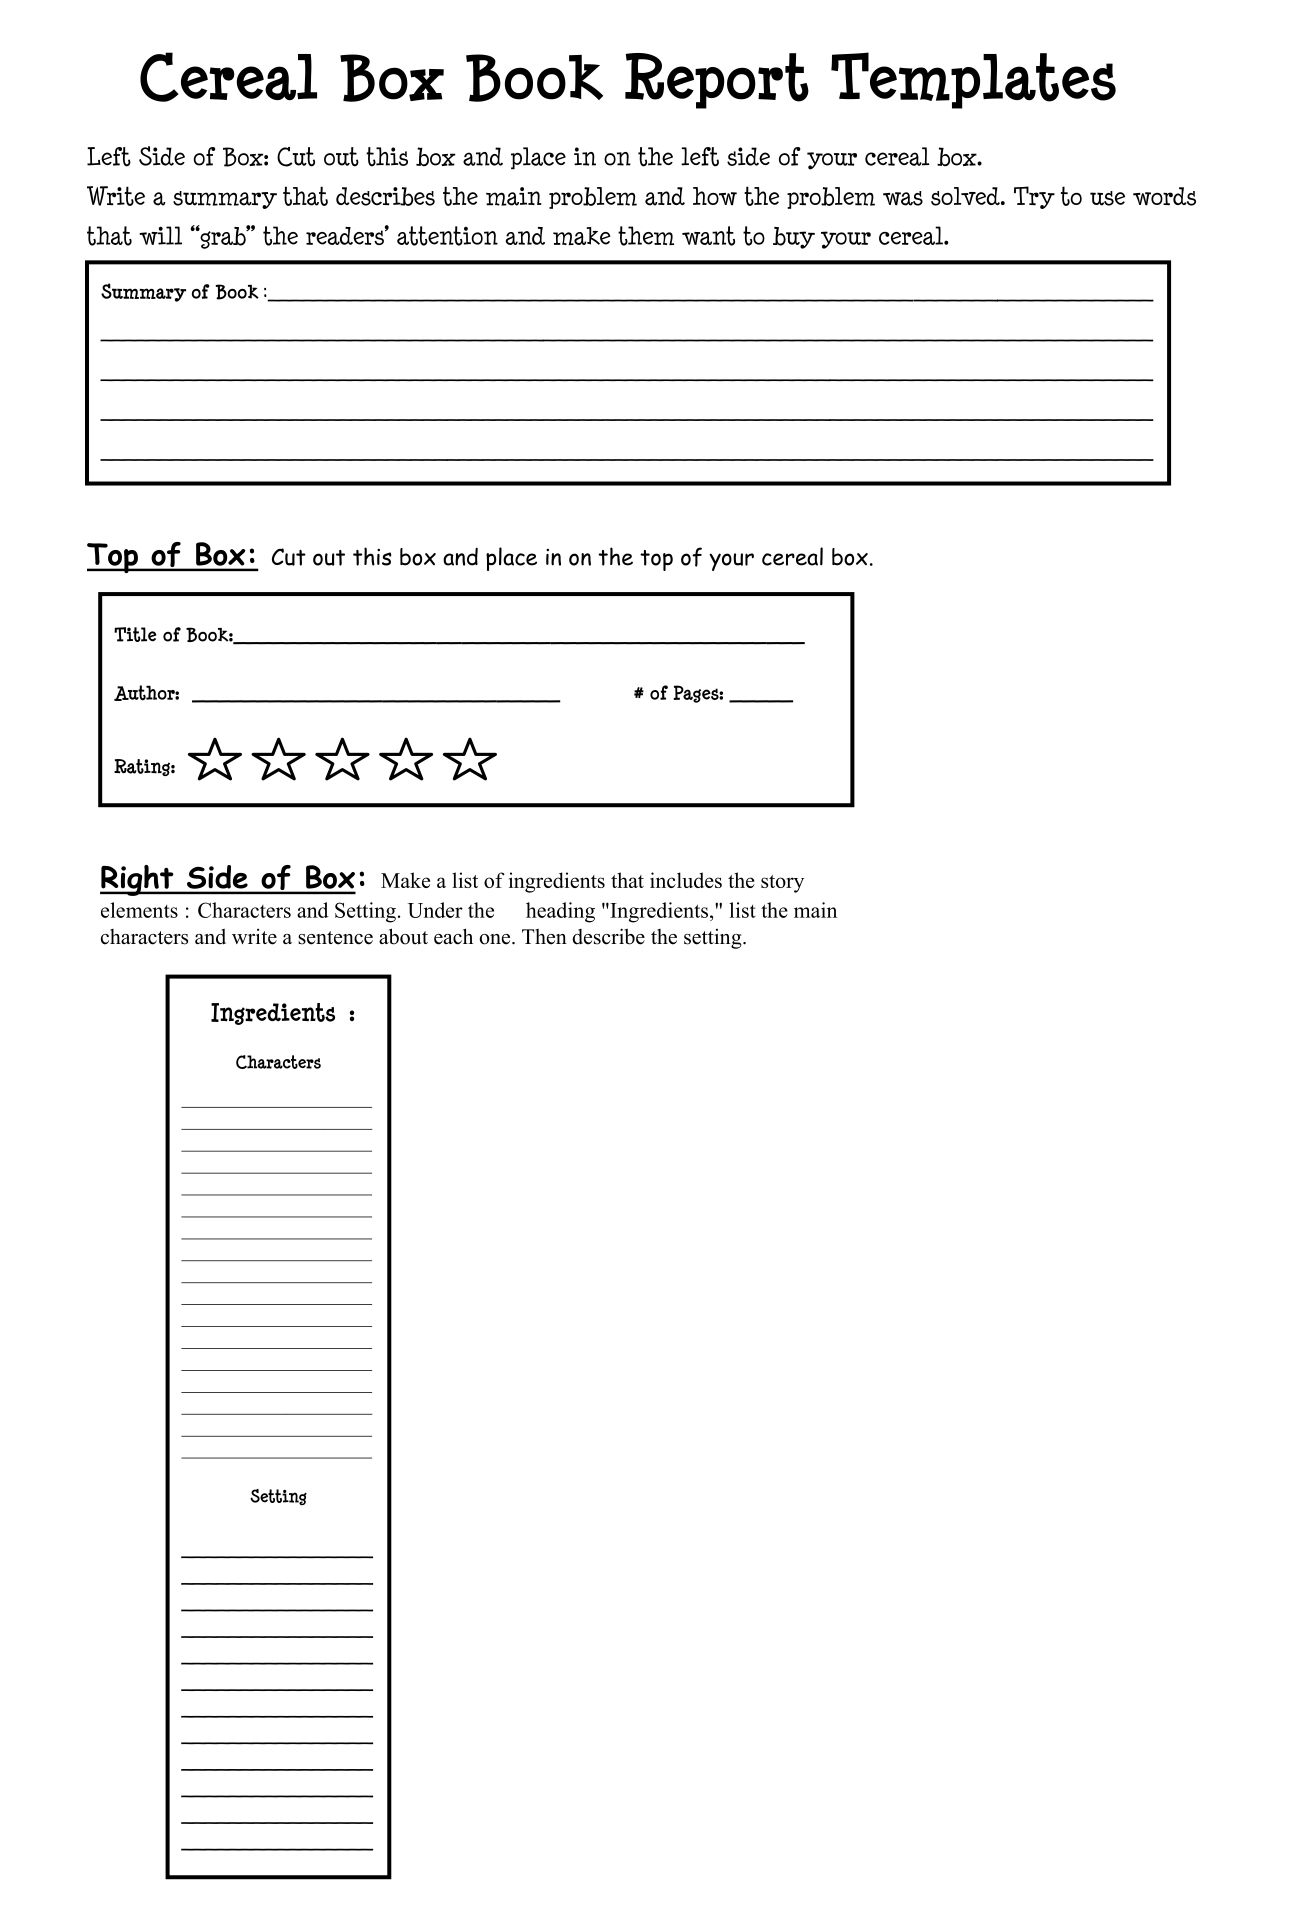 7 Best Images of Cereal Box Template Printable Cereal Box Book Report